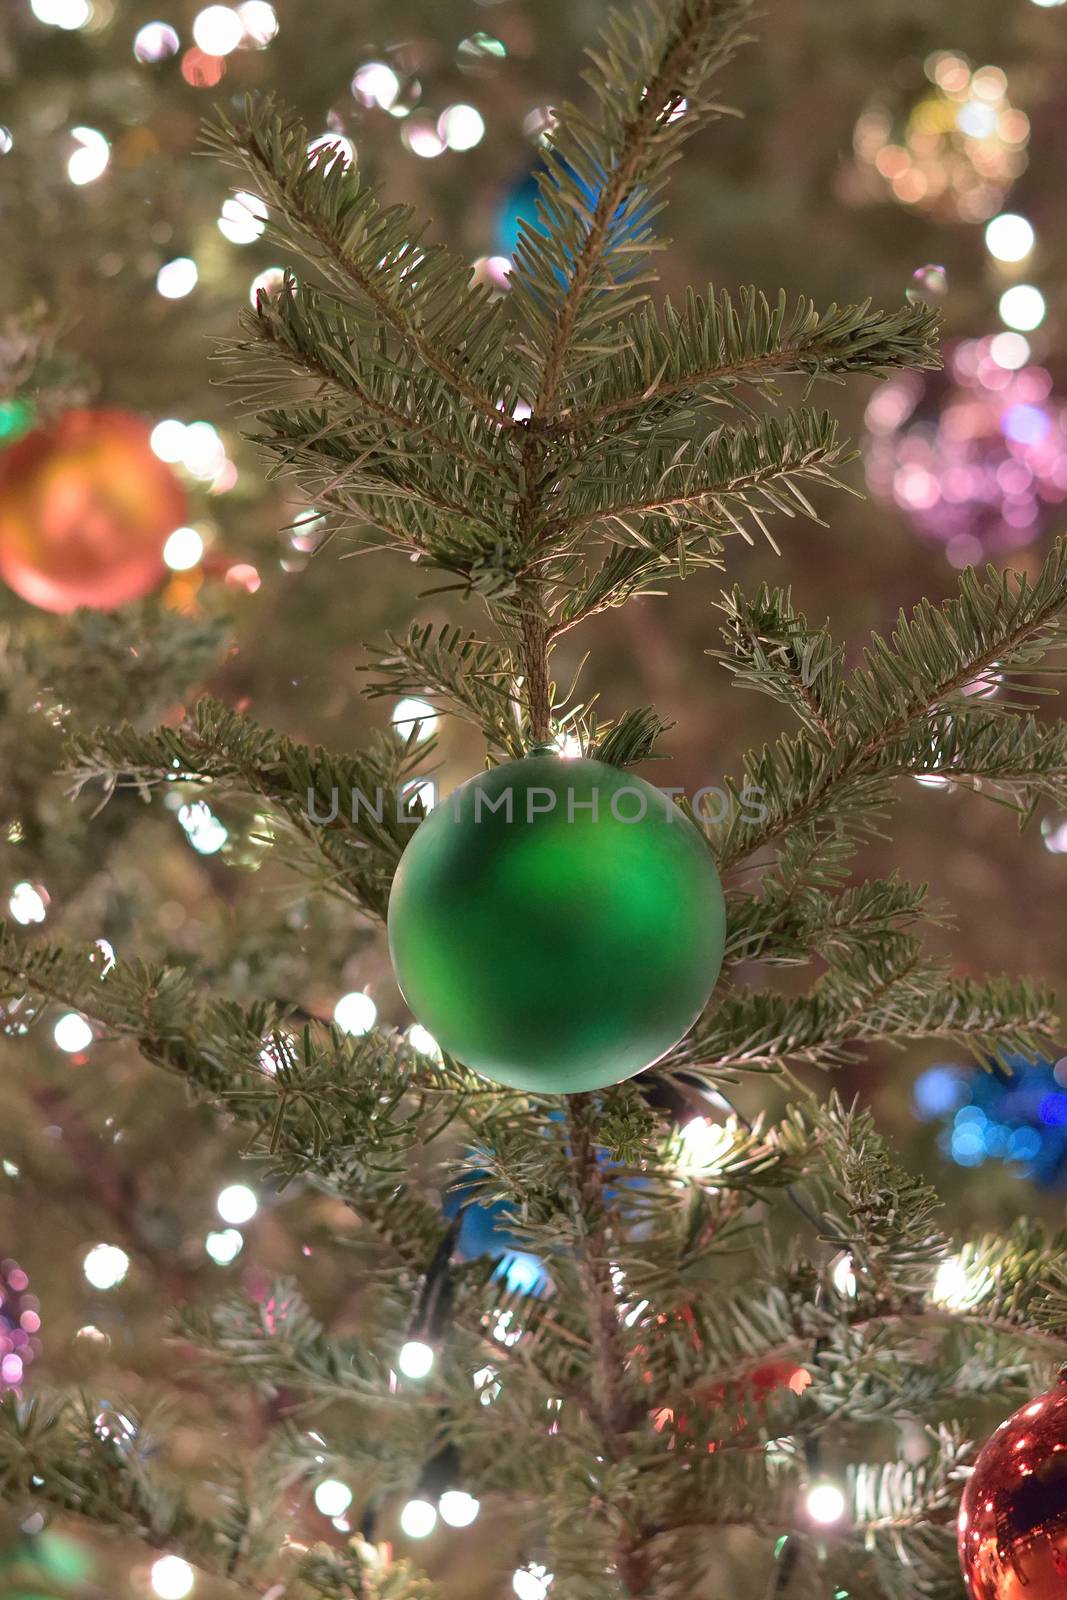 Christmas tree holiday background with decorations in vertical frame